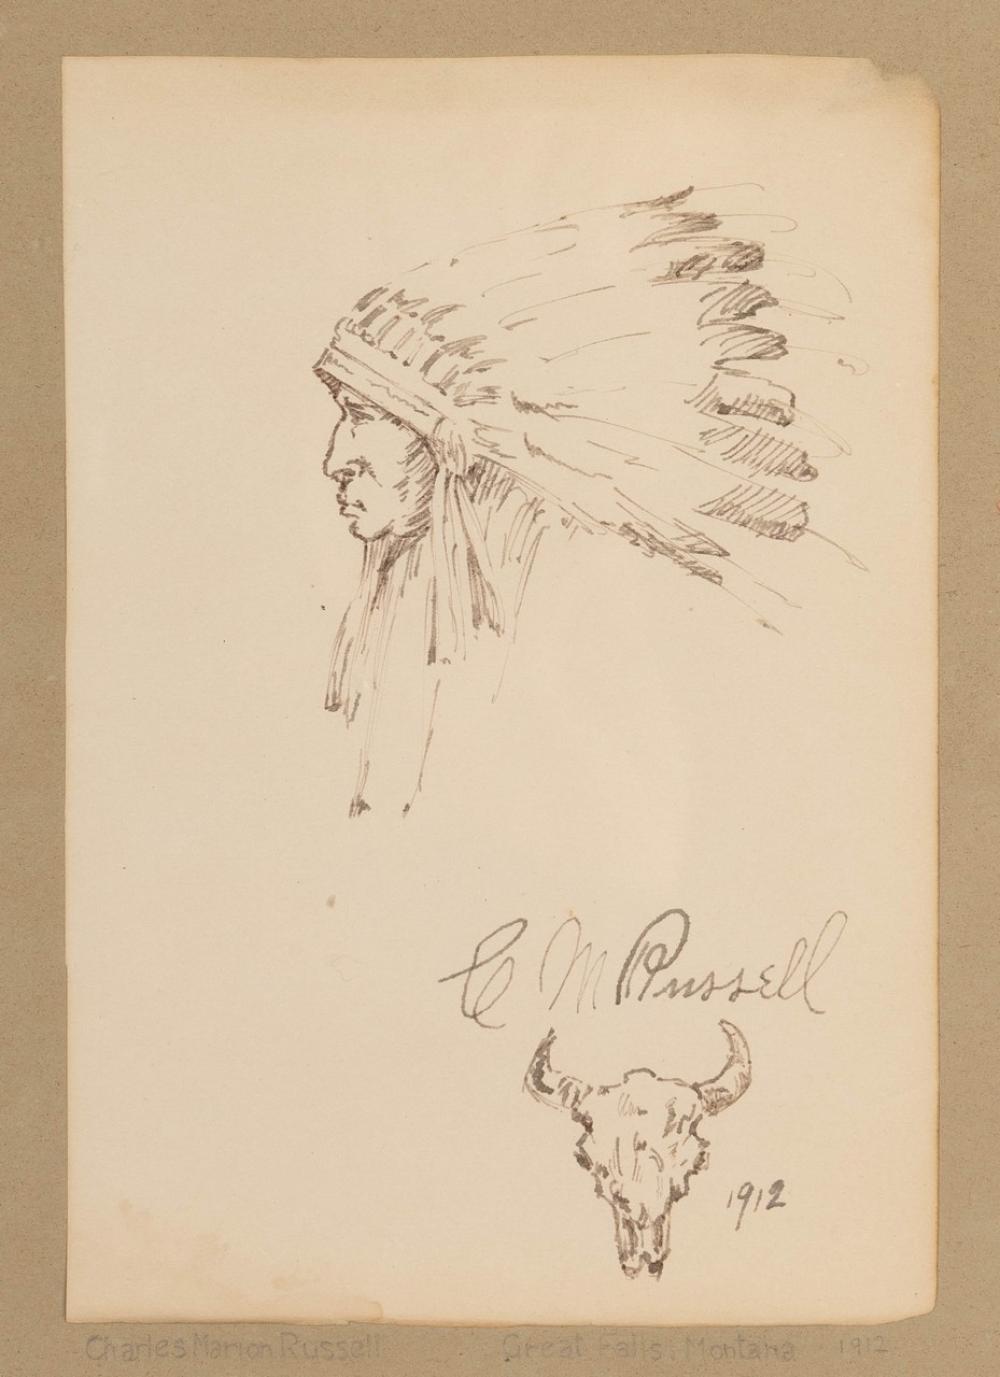 Charles Marion Russell - Indian Chief 1912 7.25" x 5"